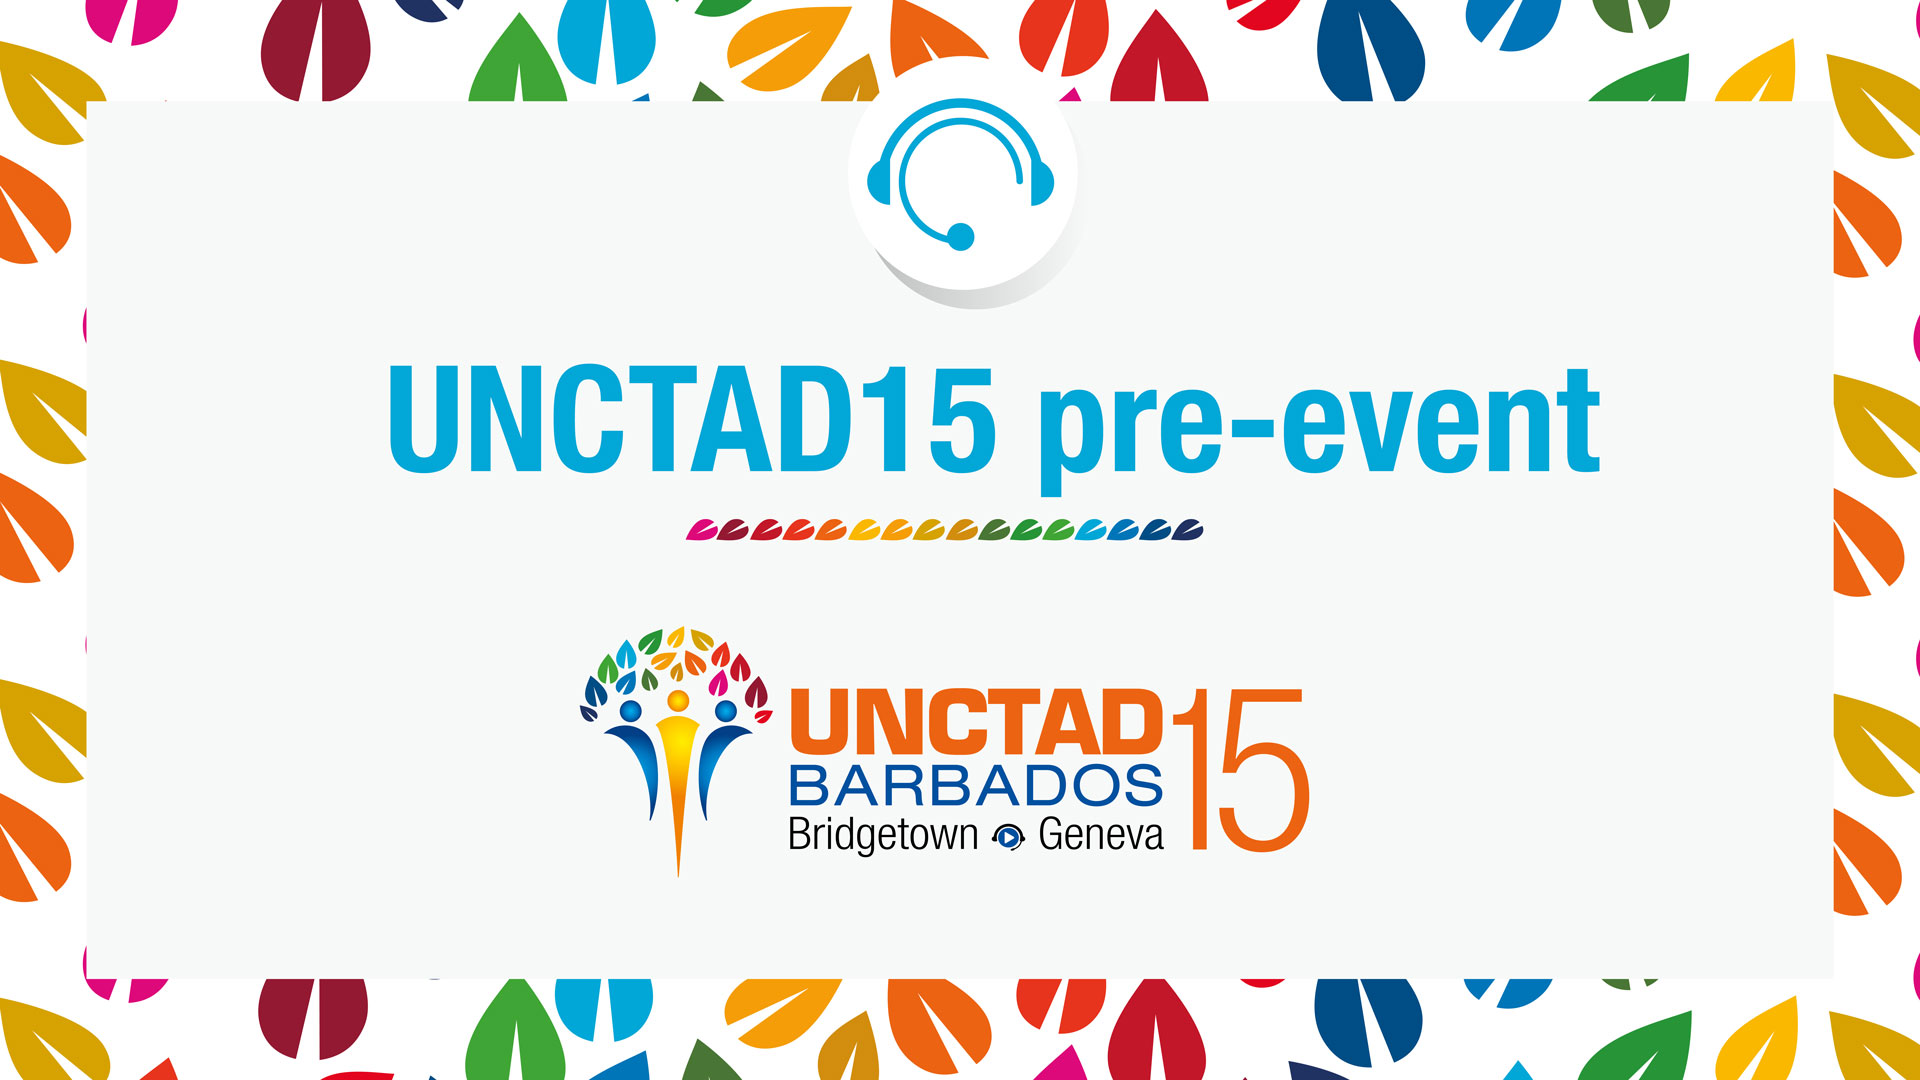 UNCTAD15 pre-event: Launch of TrainForTrade course on building port resilience against pandemics